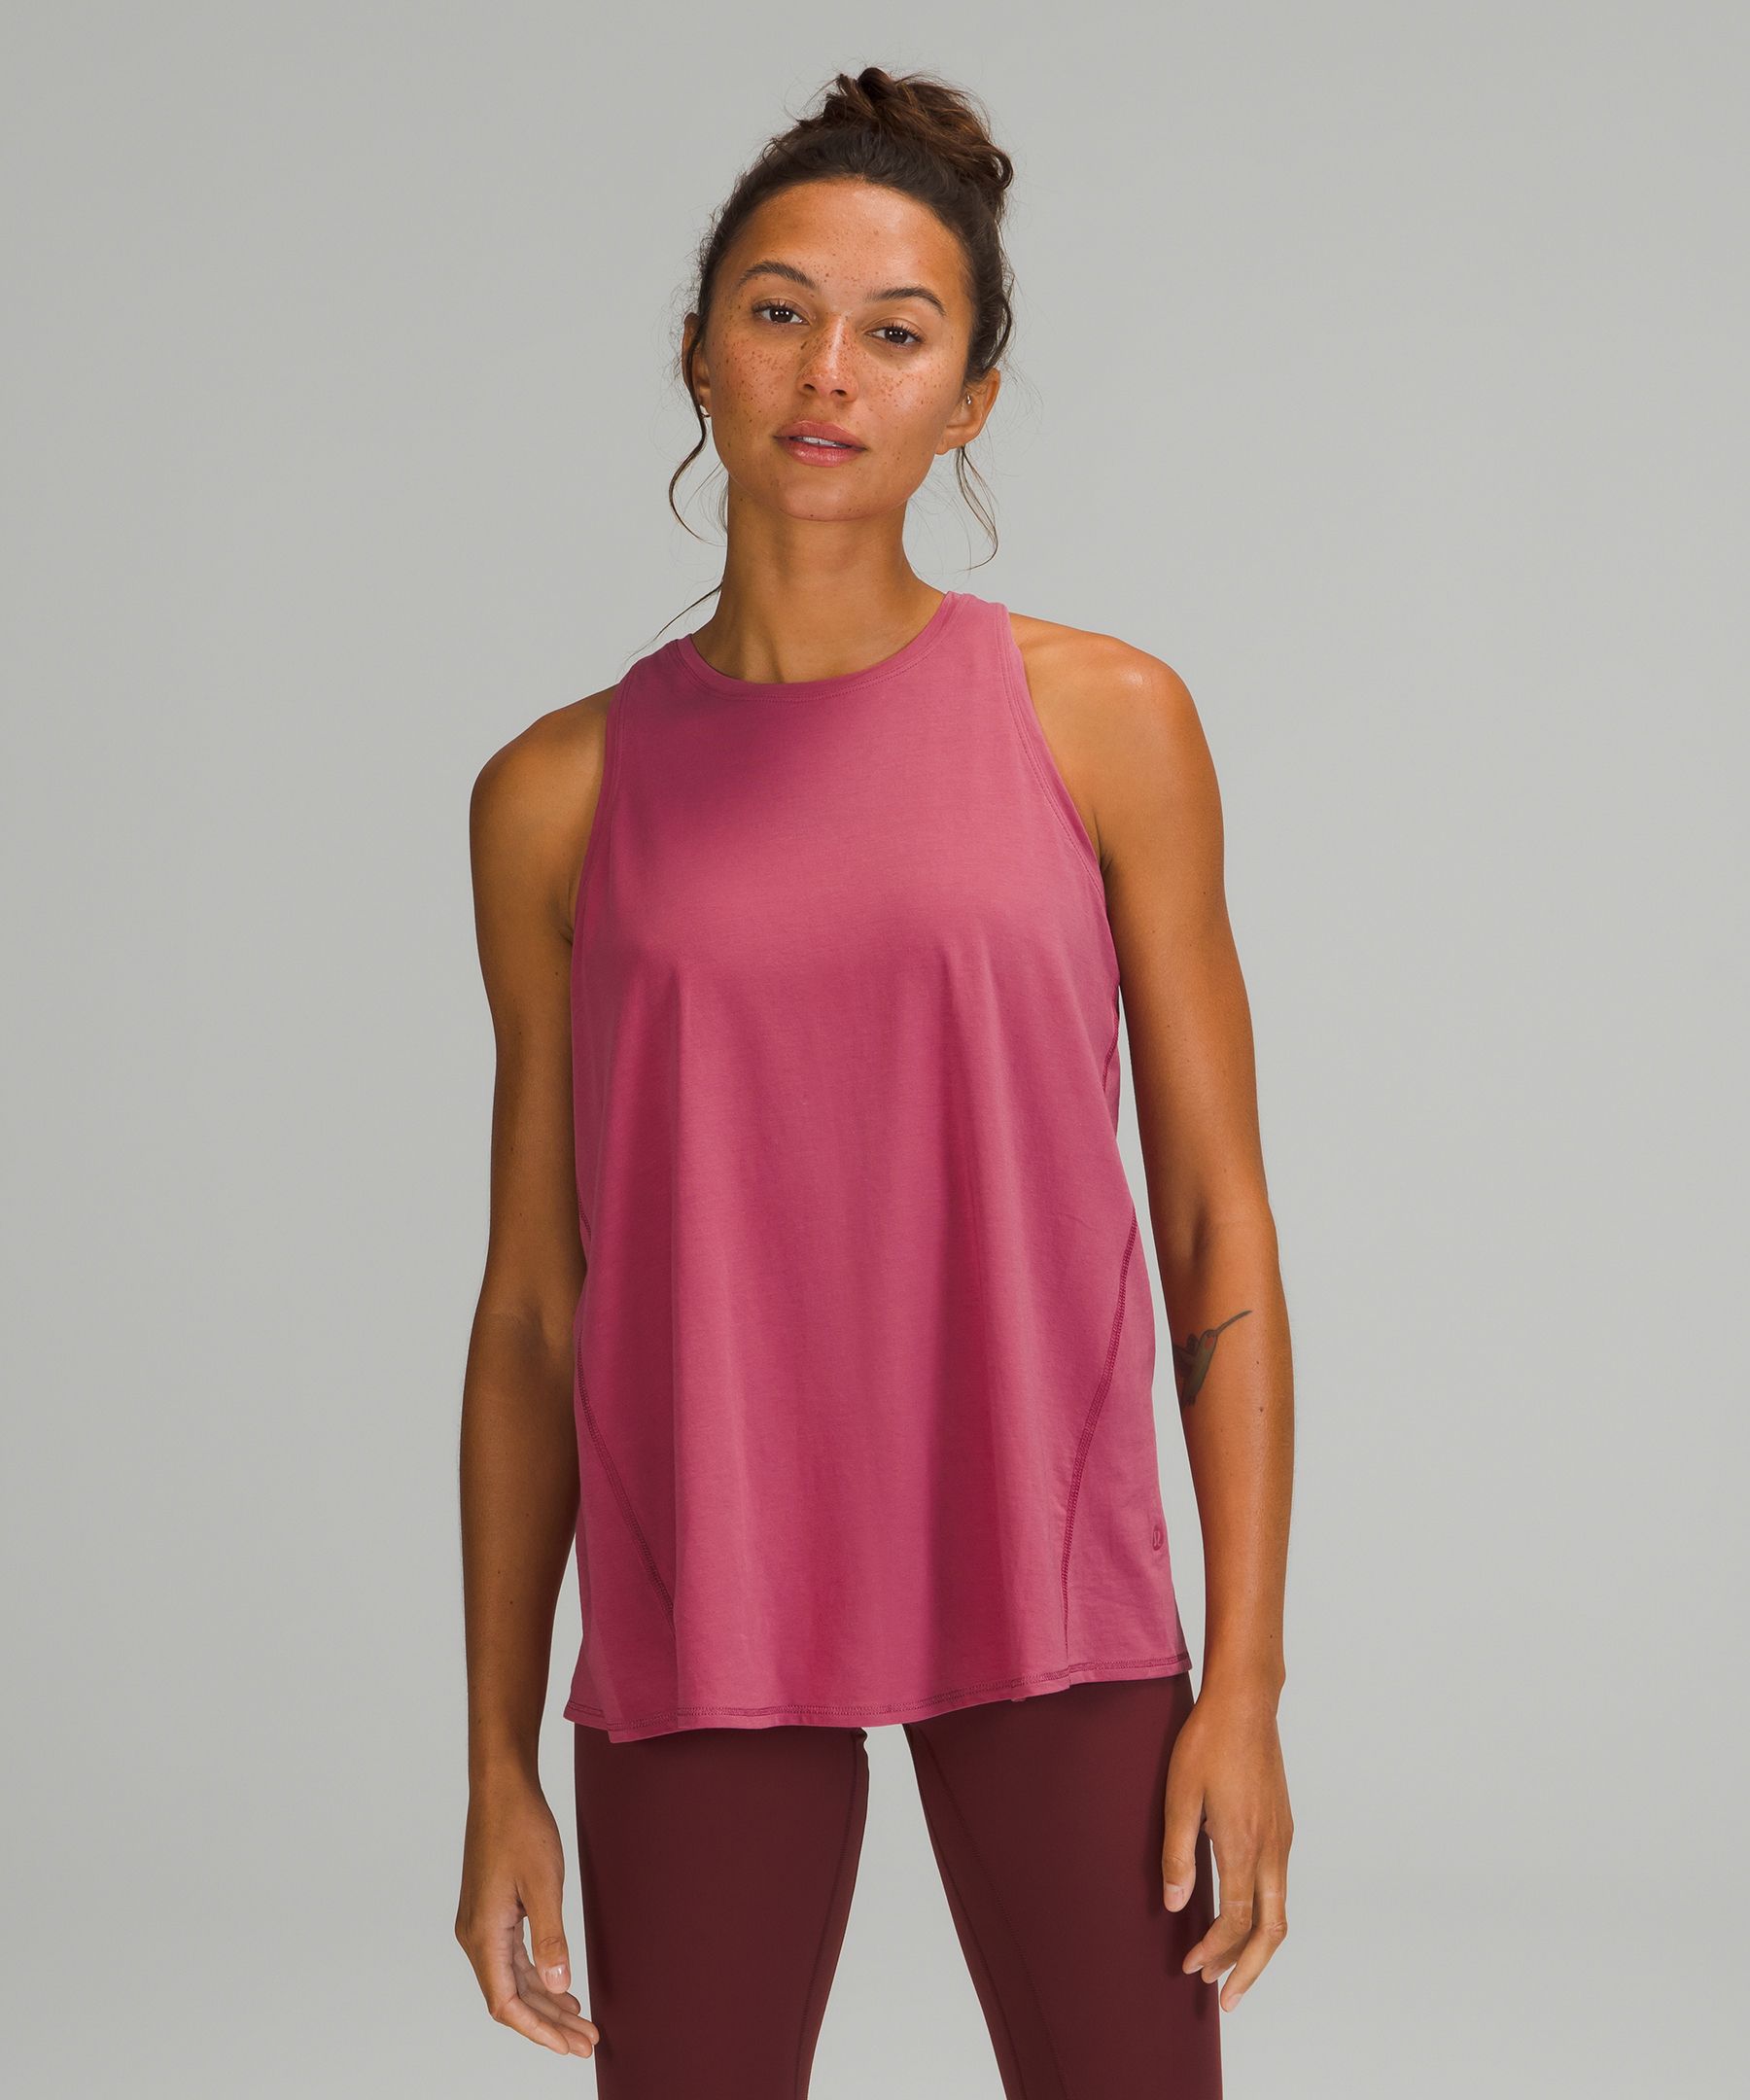 Lululemon All Tied Up Tank Top In Pink Lychee